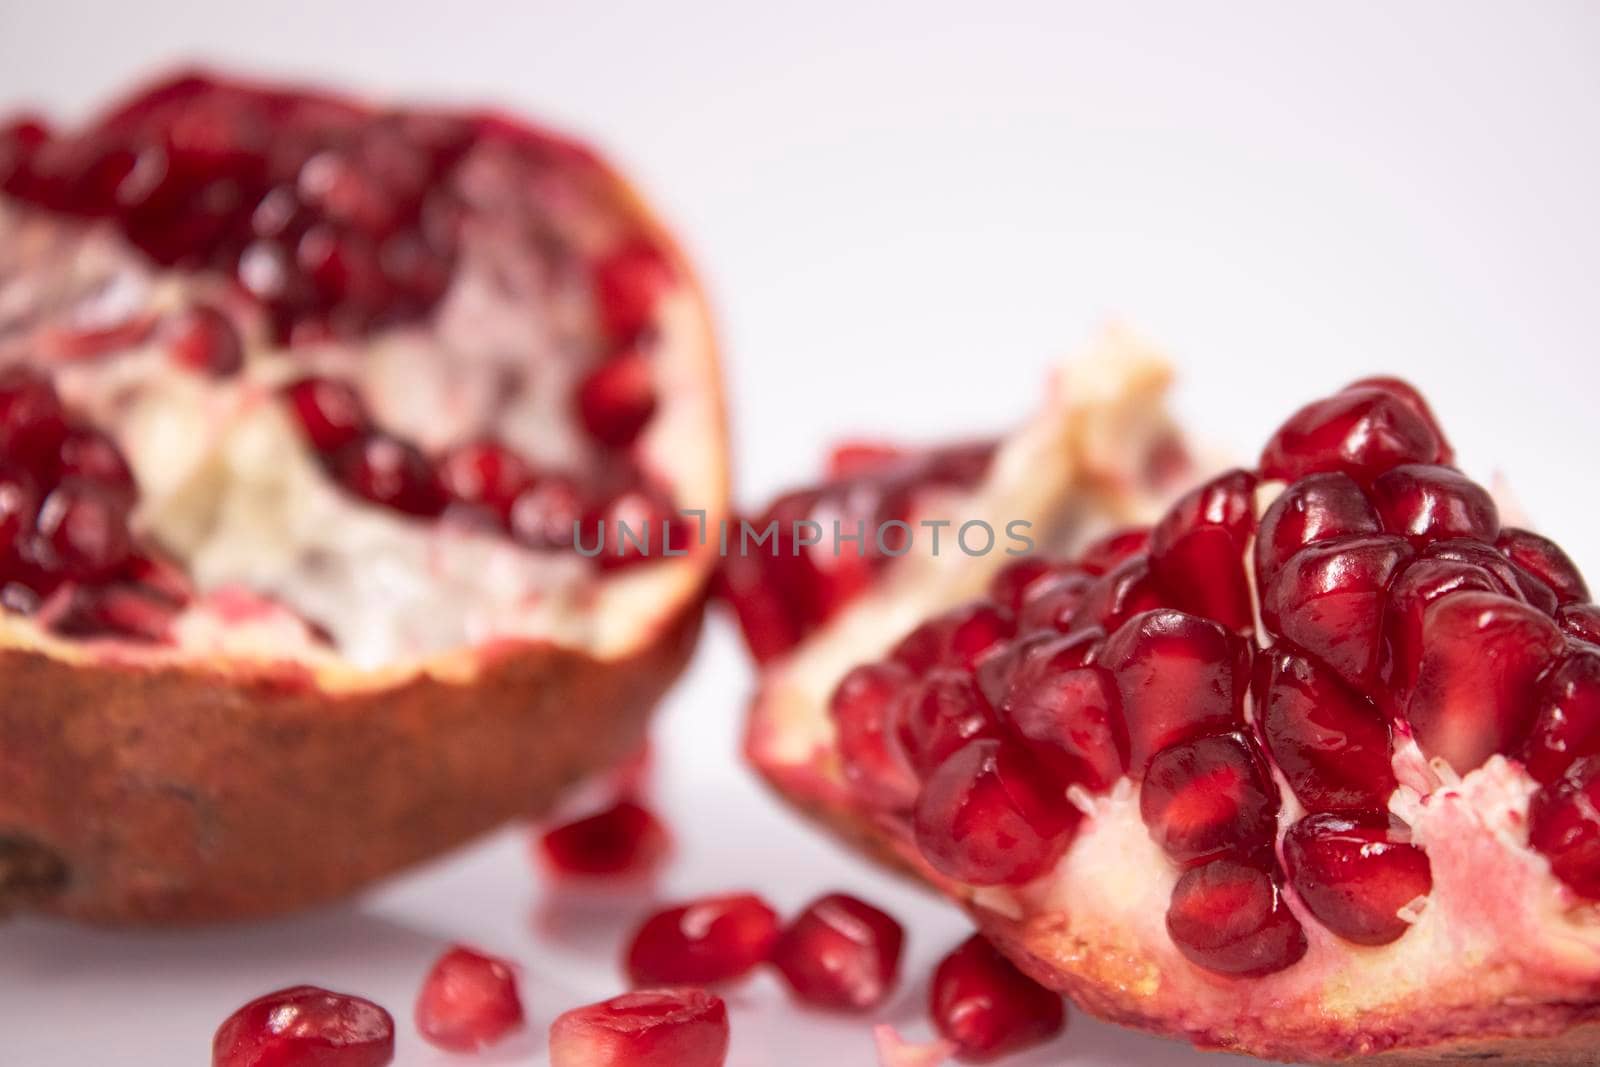 ripe fresh sliced pomegranate fruit with red seeds isolated on white background